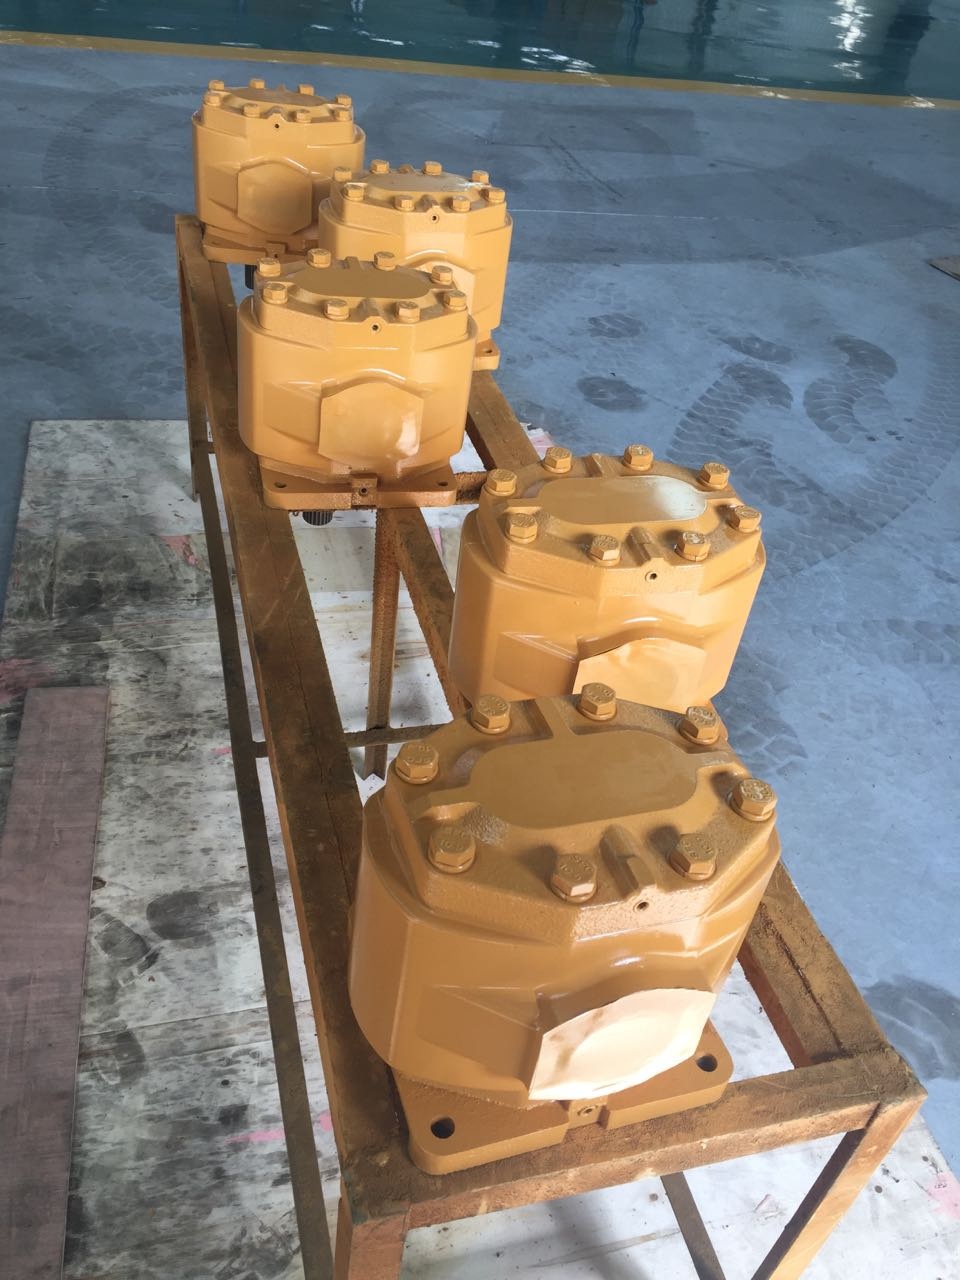 hydraulic pump price 07448-66107 for bulldozer D355A-3